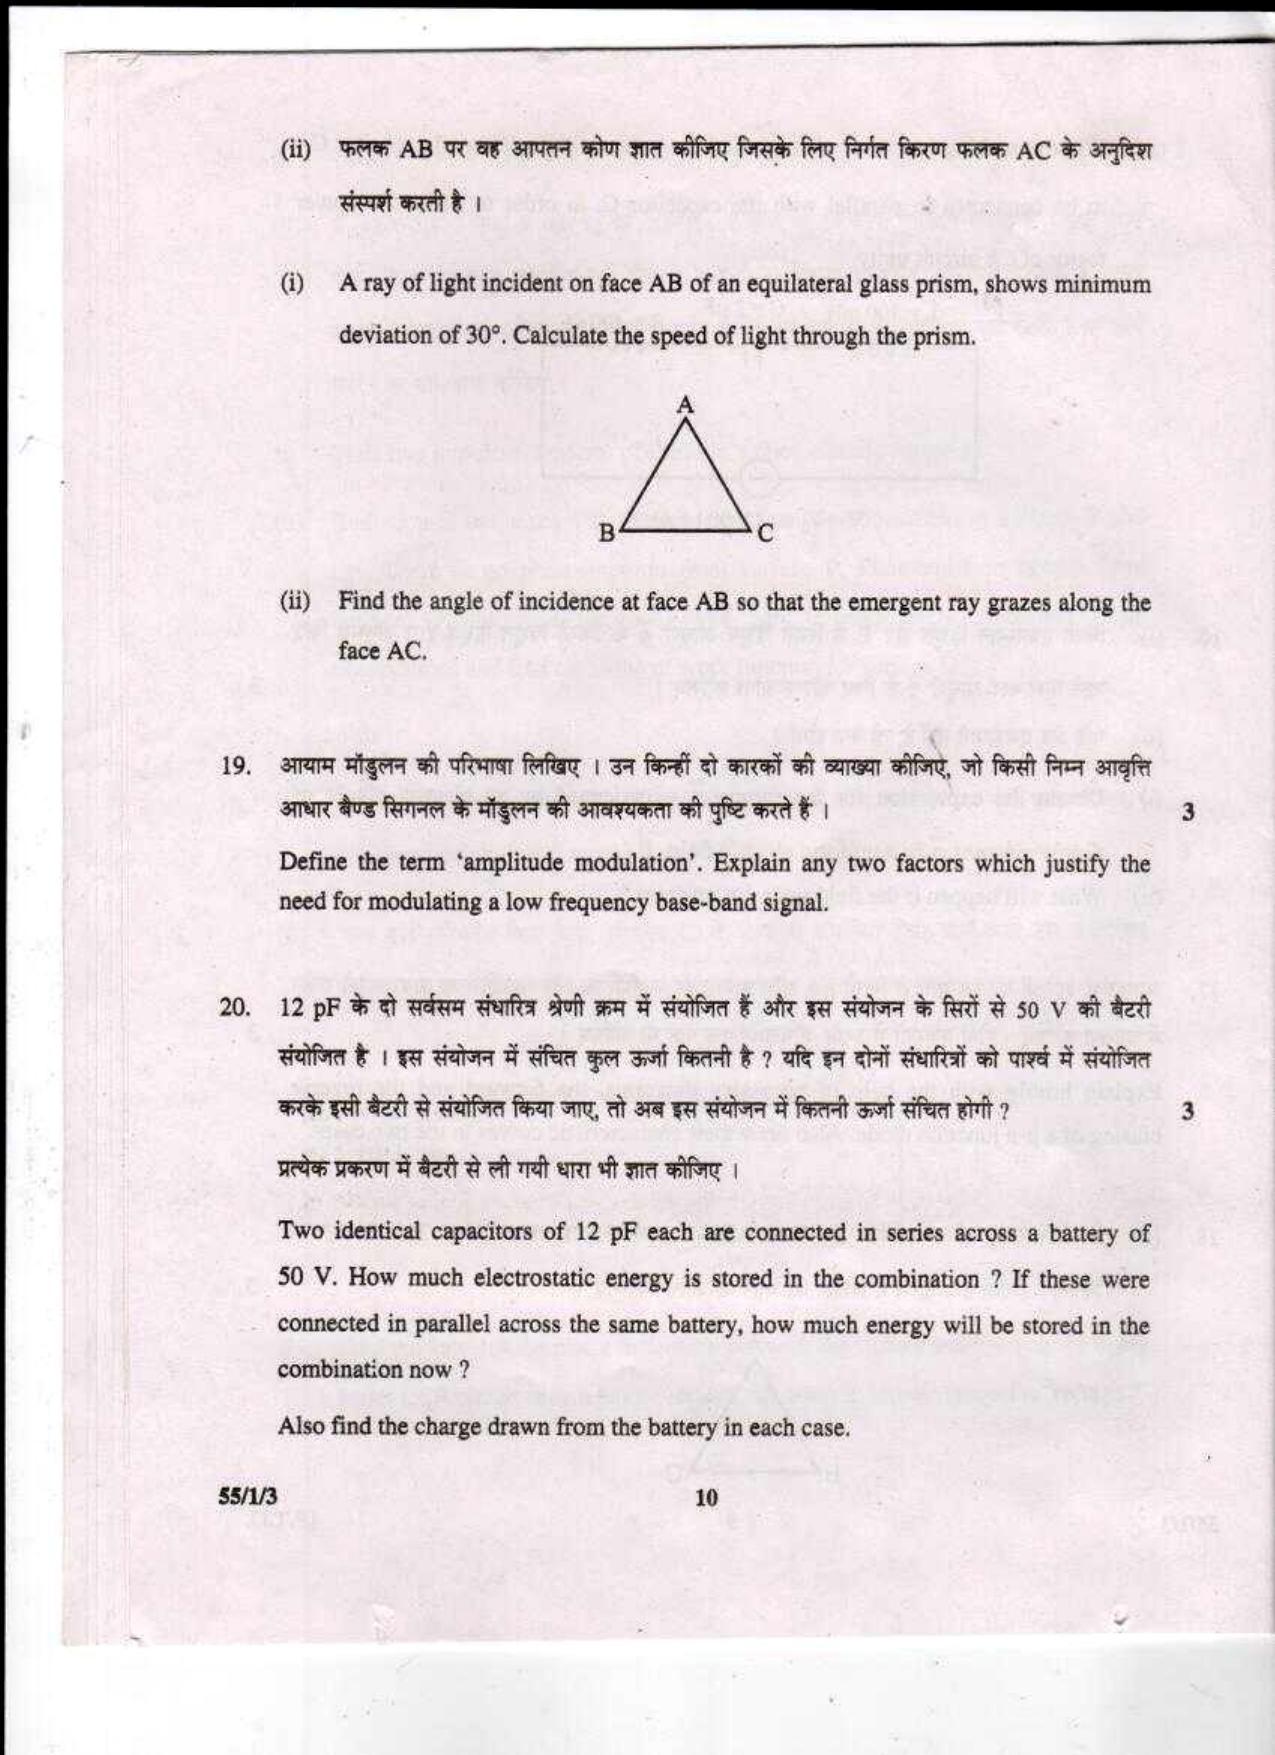 CBSE Class 12 Physics (Theory) SET 3-Delhi-12 2017 Question Paper - Page 10